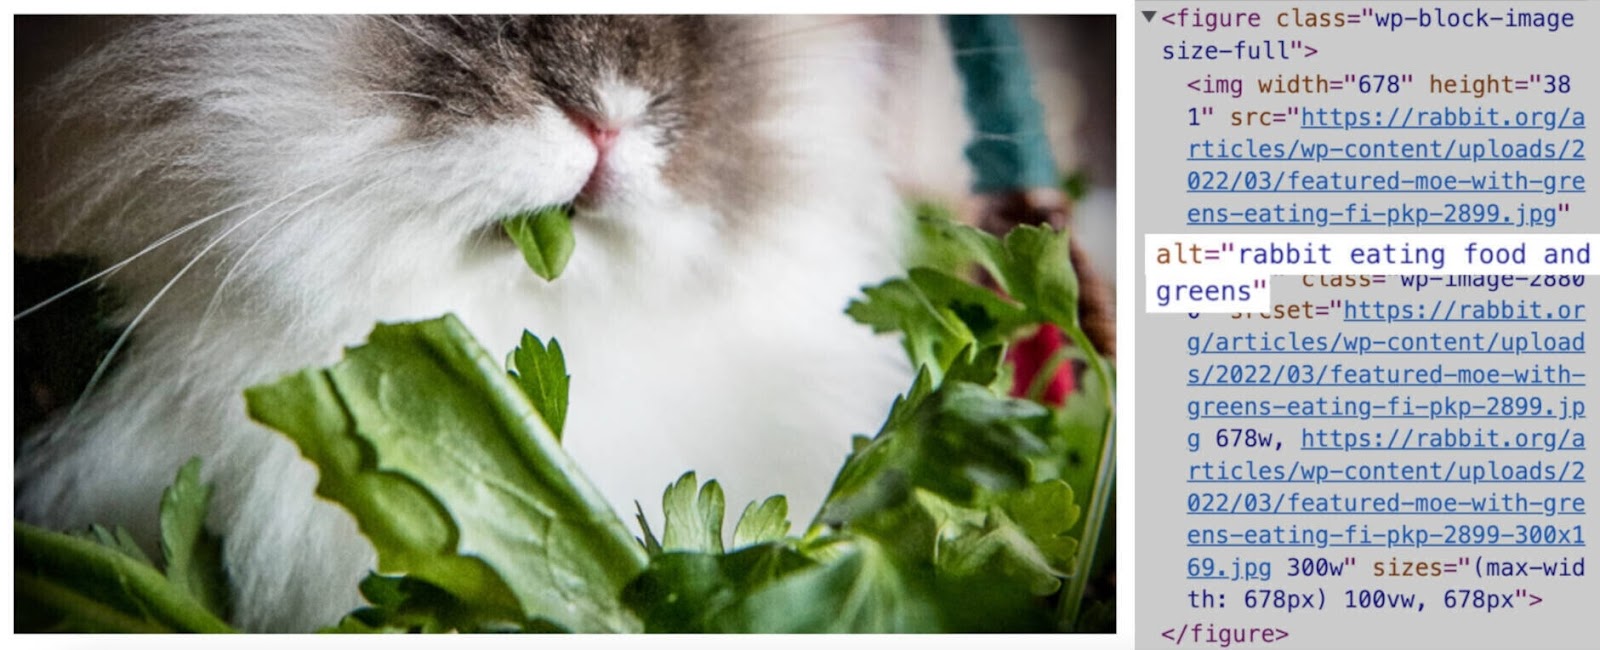 Rabbit representation  has alt substance   successful  the codification  "rabbit eating nutrient  and greens"